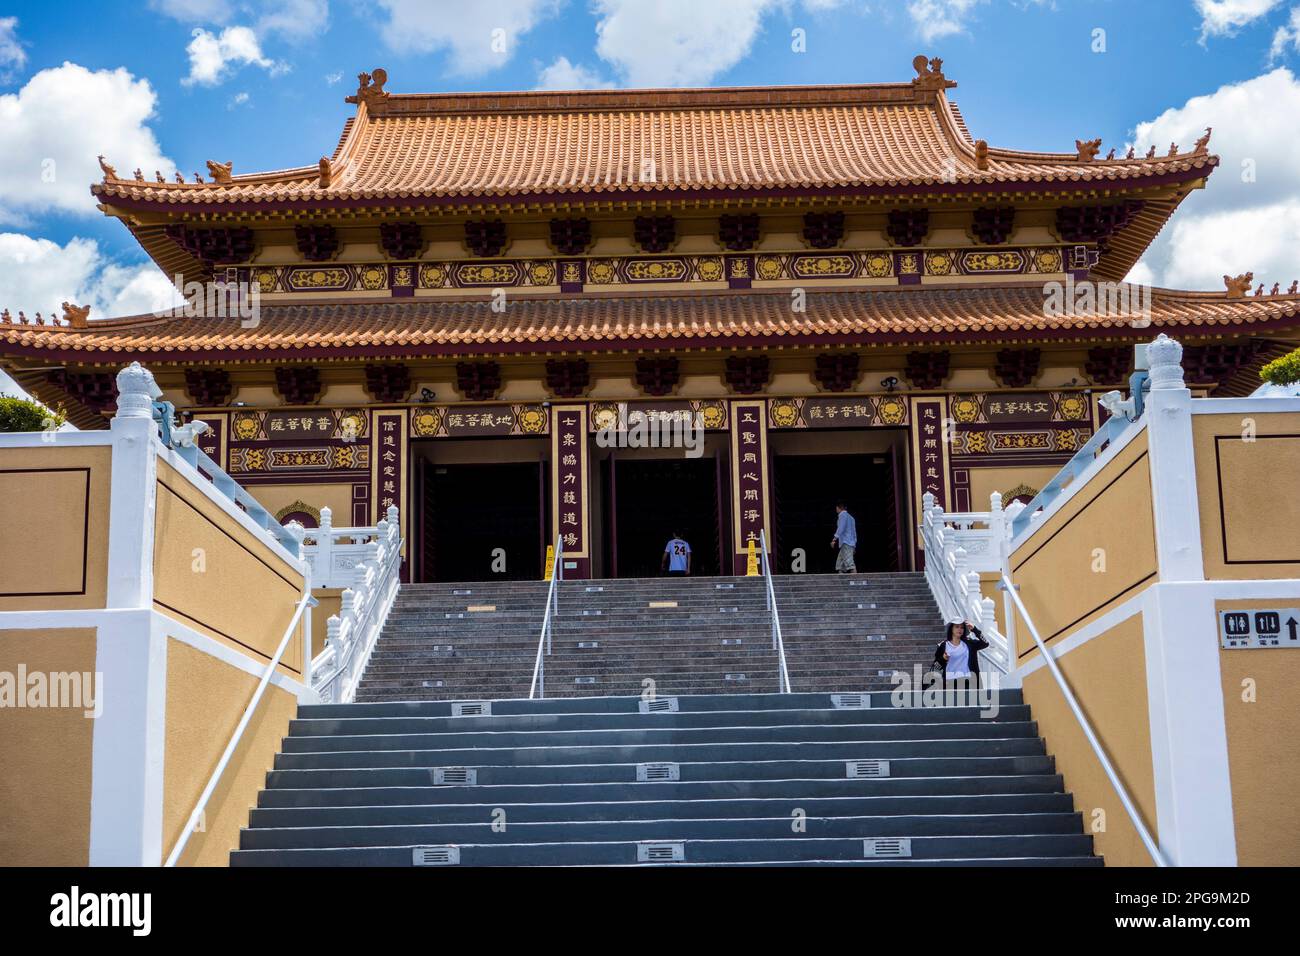 Hsi Lai Temple, city of Hacienda Heights, Los Angeles County, California, United States of America Stock Photo